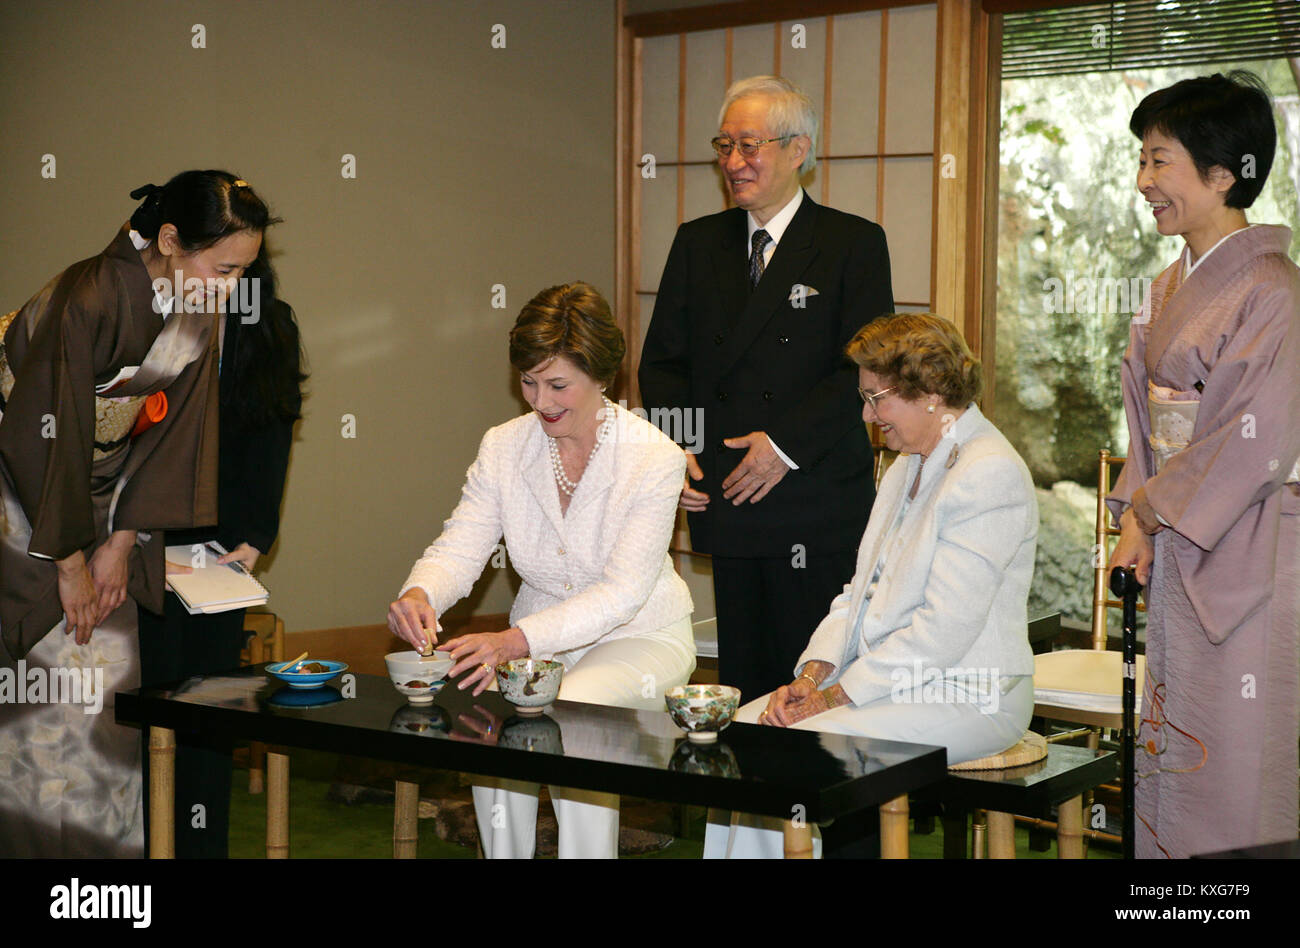 Washington, District of Columbia, USA. 17th Apr, 2006. First lady Laura Bush, joined by her mother, Mrs. Jenna Welch, right, is given whisking instructions by Ms. Sakiko Akiyama, executive assistant to Grand Master Sen Genshitsu, left, while participating in a Japanese Tea Ceremony, Monday, April 17, 2006, in Washington, DC, with H.E. Ryozo Kato, Ambassador of Japan to the US, and his wife, Mrs. Hanayo Kato. Mandatory Credit: Shealah Craighead/White House via CNP Credit: Shealah Craighead/CNP/ZUMA Wire/Alamy Live News Stock Photo